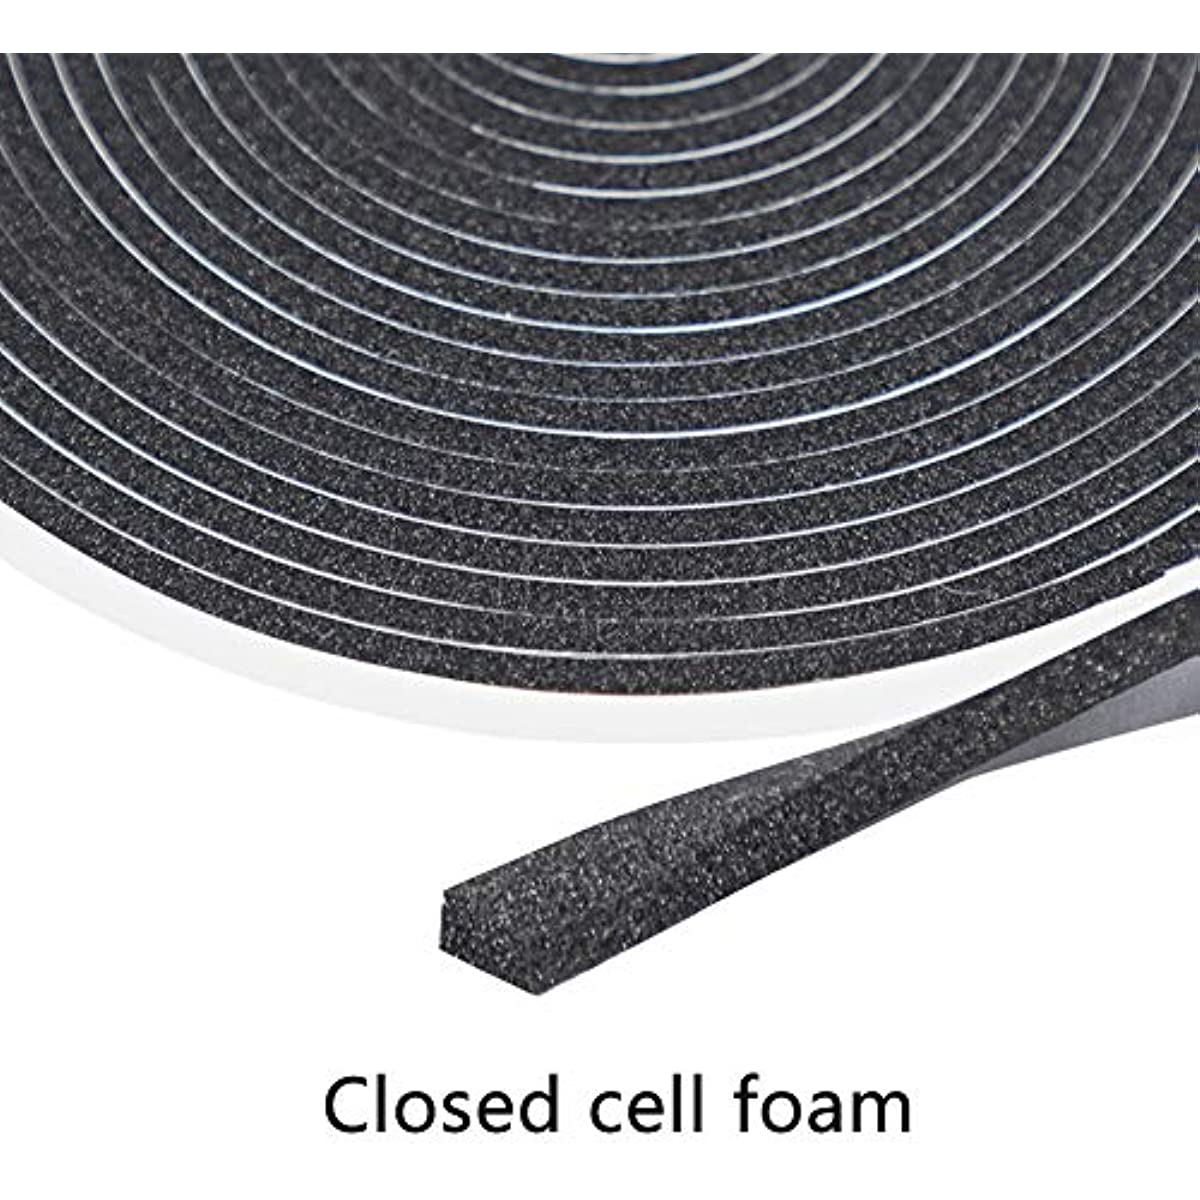 1/4 x 1/8 Closed-Cell Foam-Tape Weatherstripping